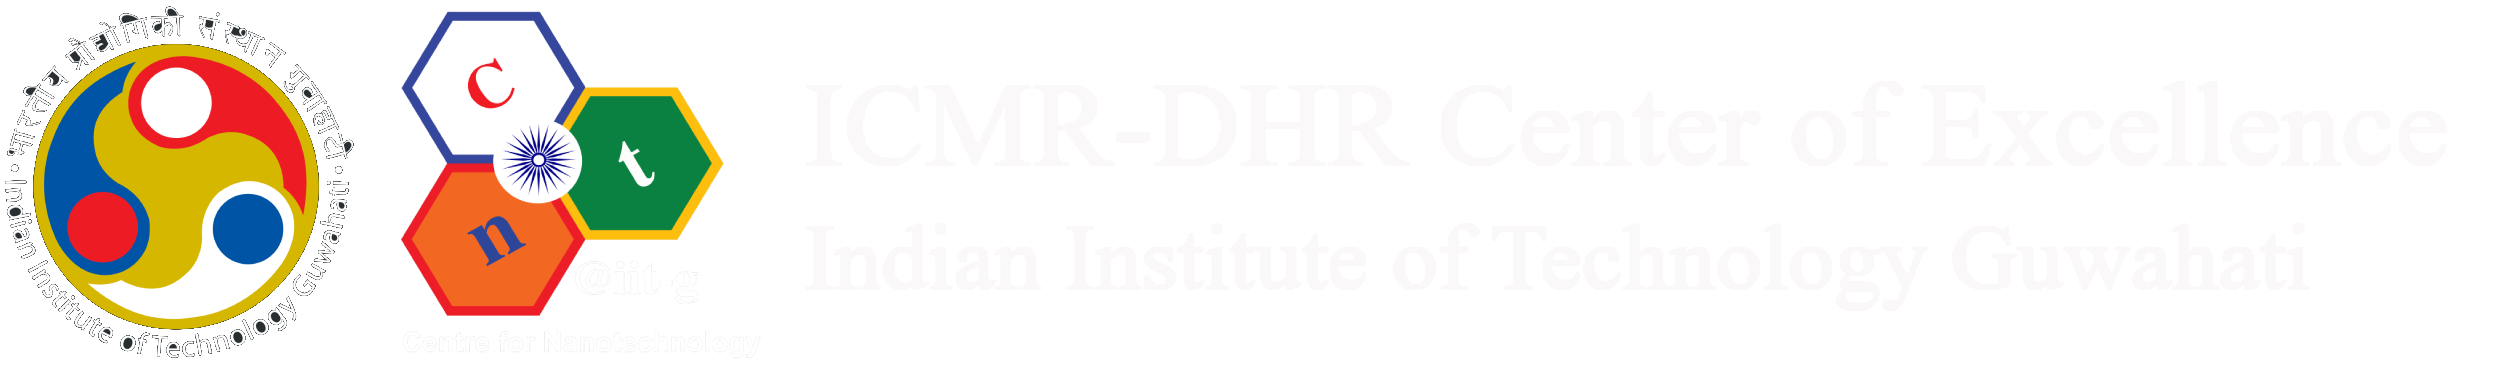 ICMR-DHR Center of Excellence